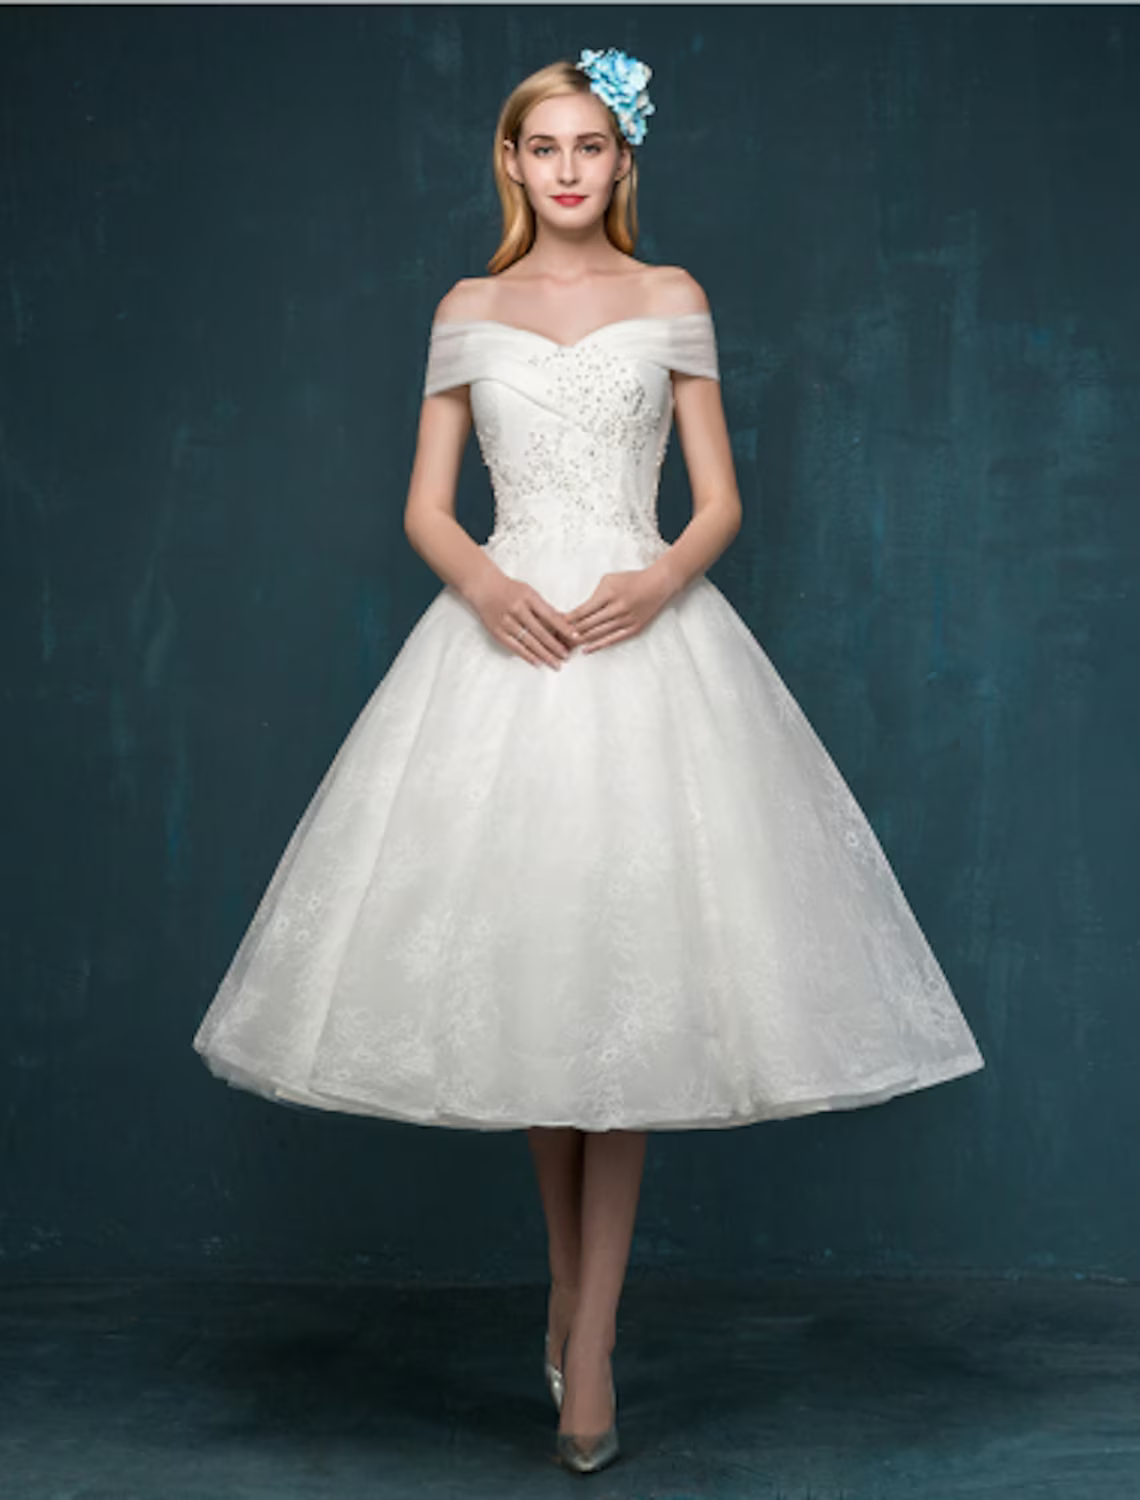 Little White Dresses Wedding Dresses Tea Length A-Line Short Sleeve Off Shoulder Beaded Lace With Beading Sequin